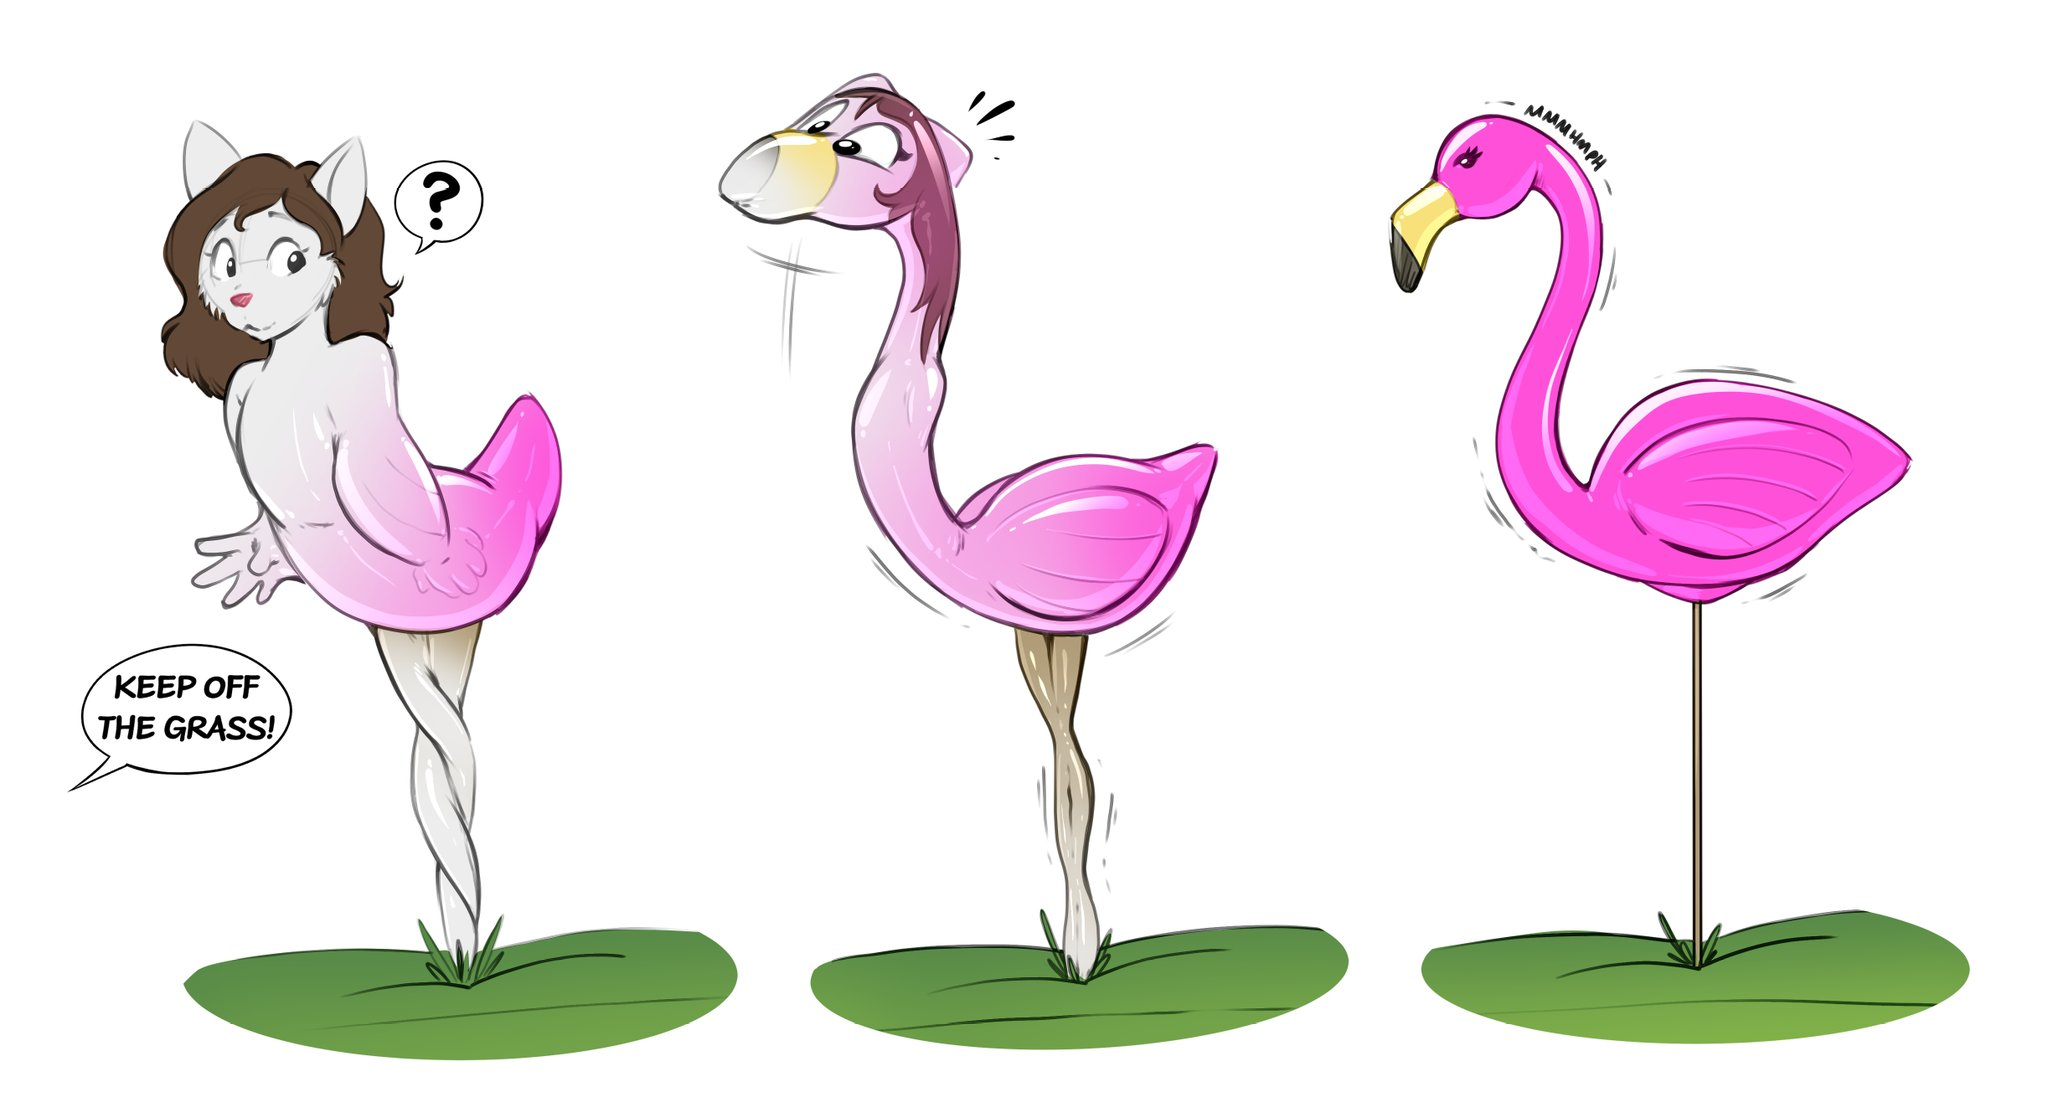 [Inanimate] Plastic Flamingo by Redflare500 : r/Inanimate_TFs